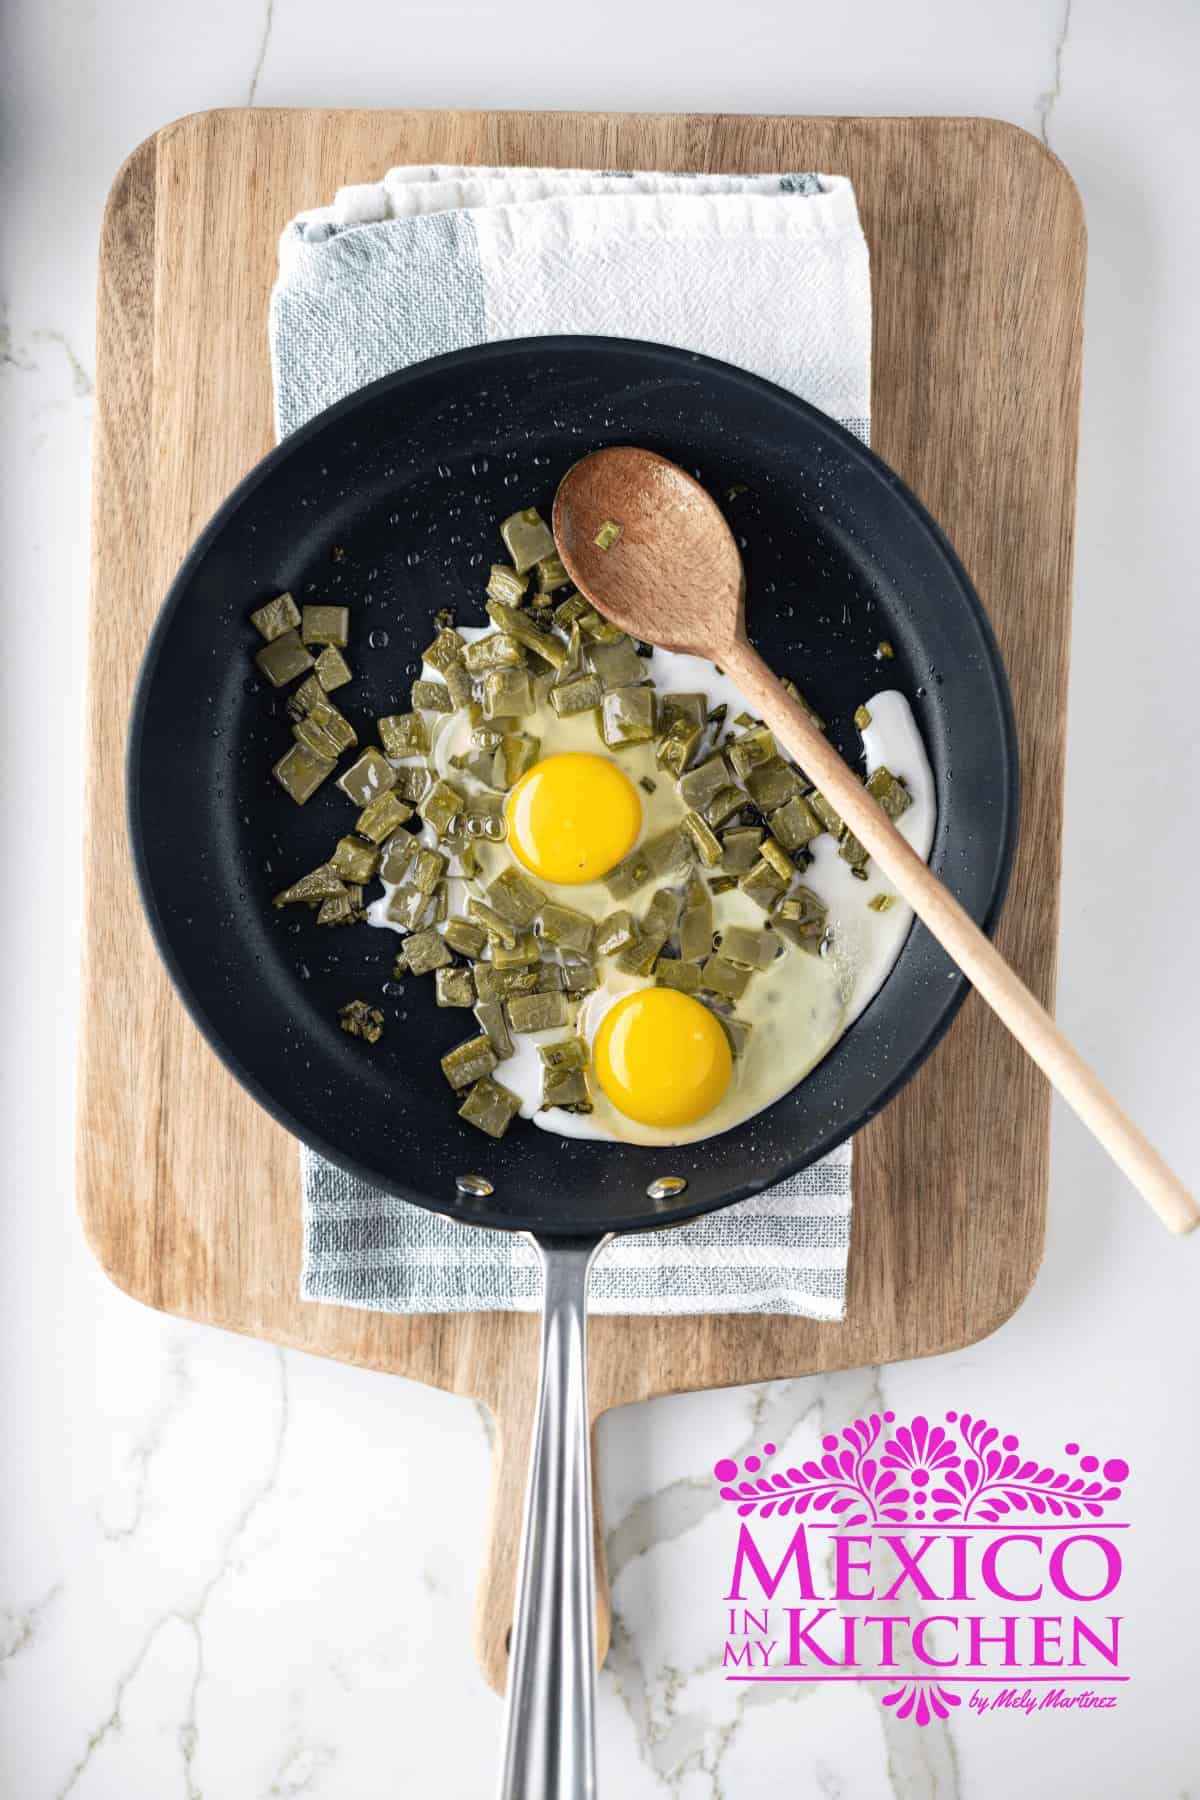 Cooking cactus paddles and eggs on a frying pan.